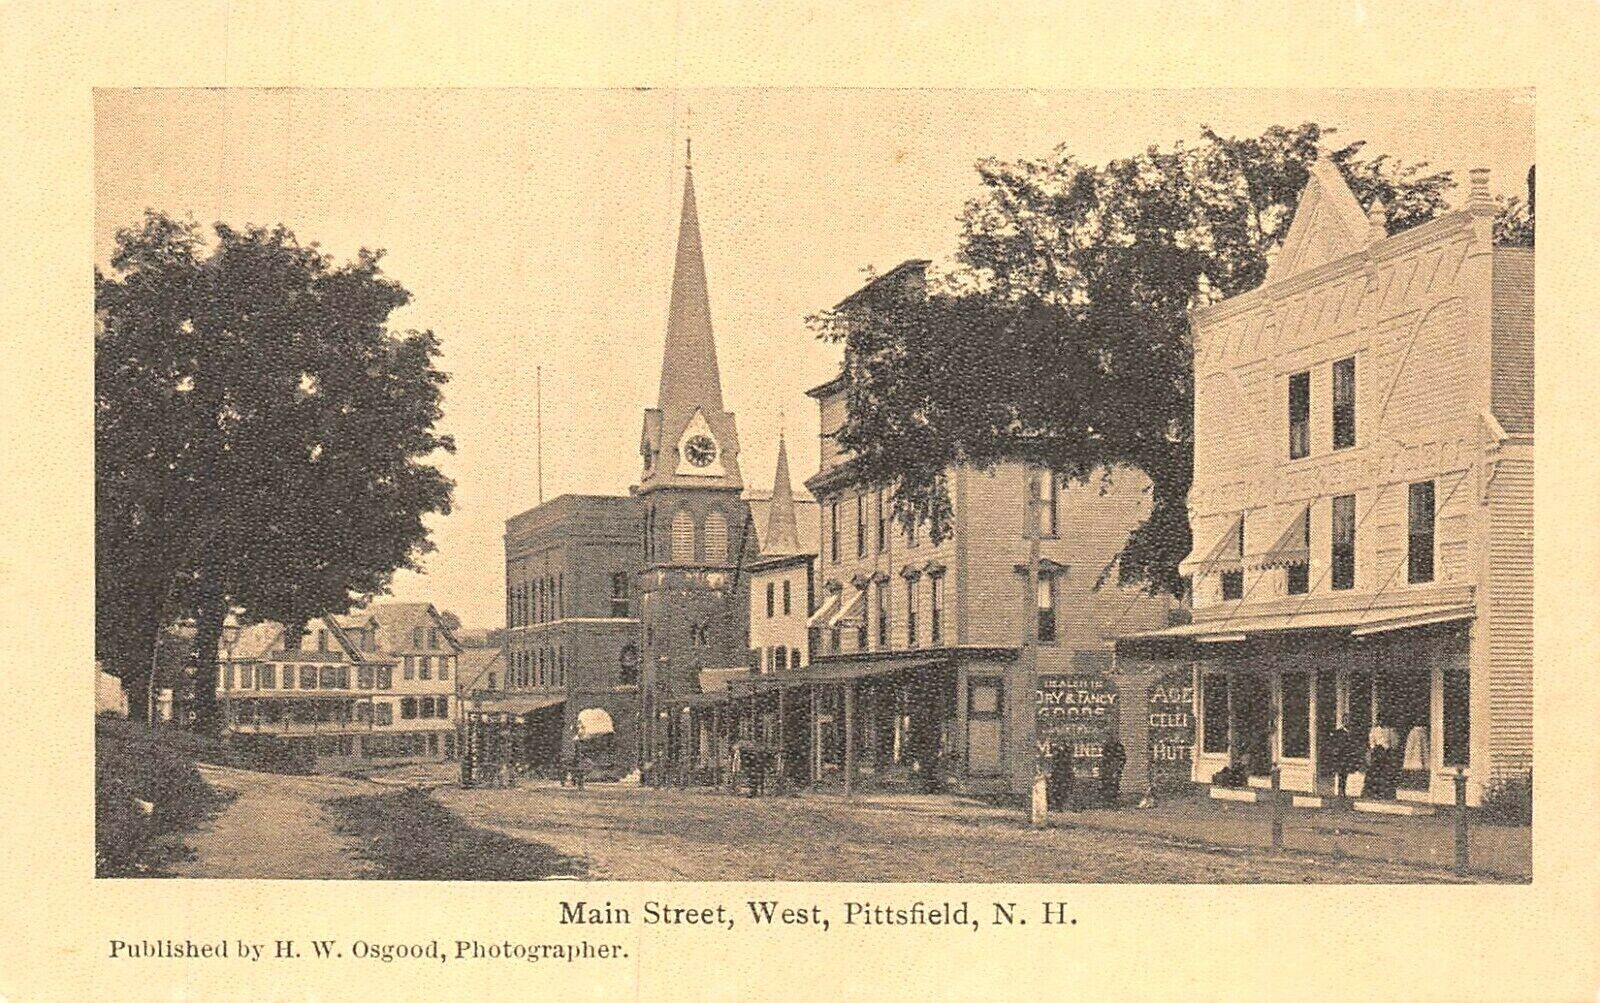 Pittsfield, NH:  Main Street, West showing businesses in 1901-1907